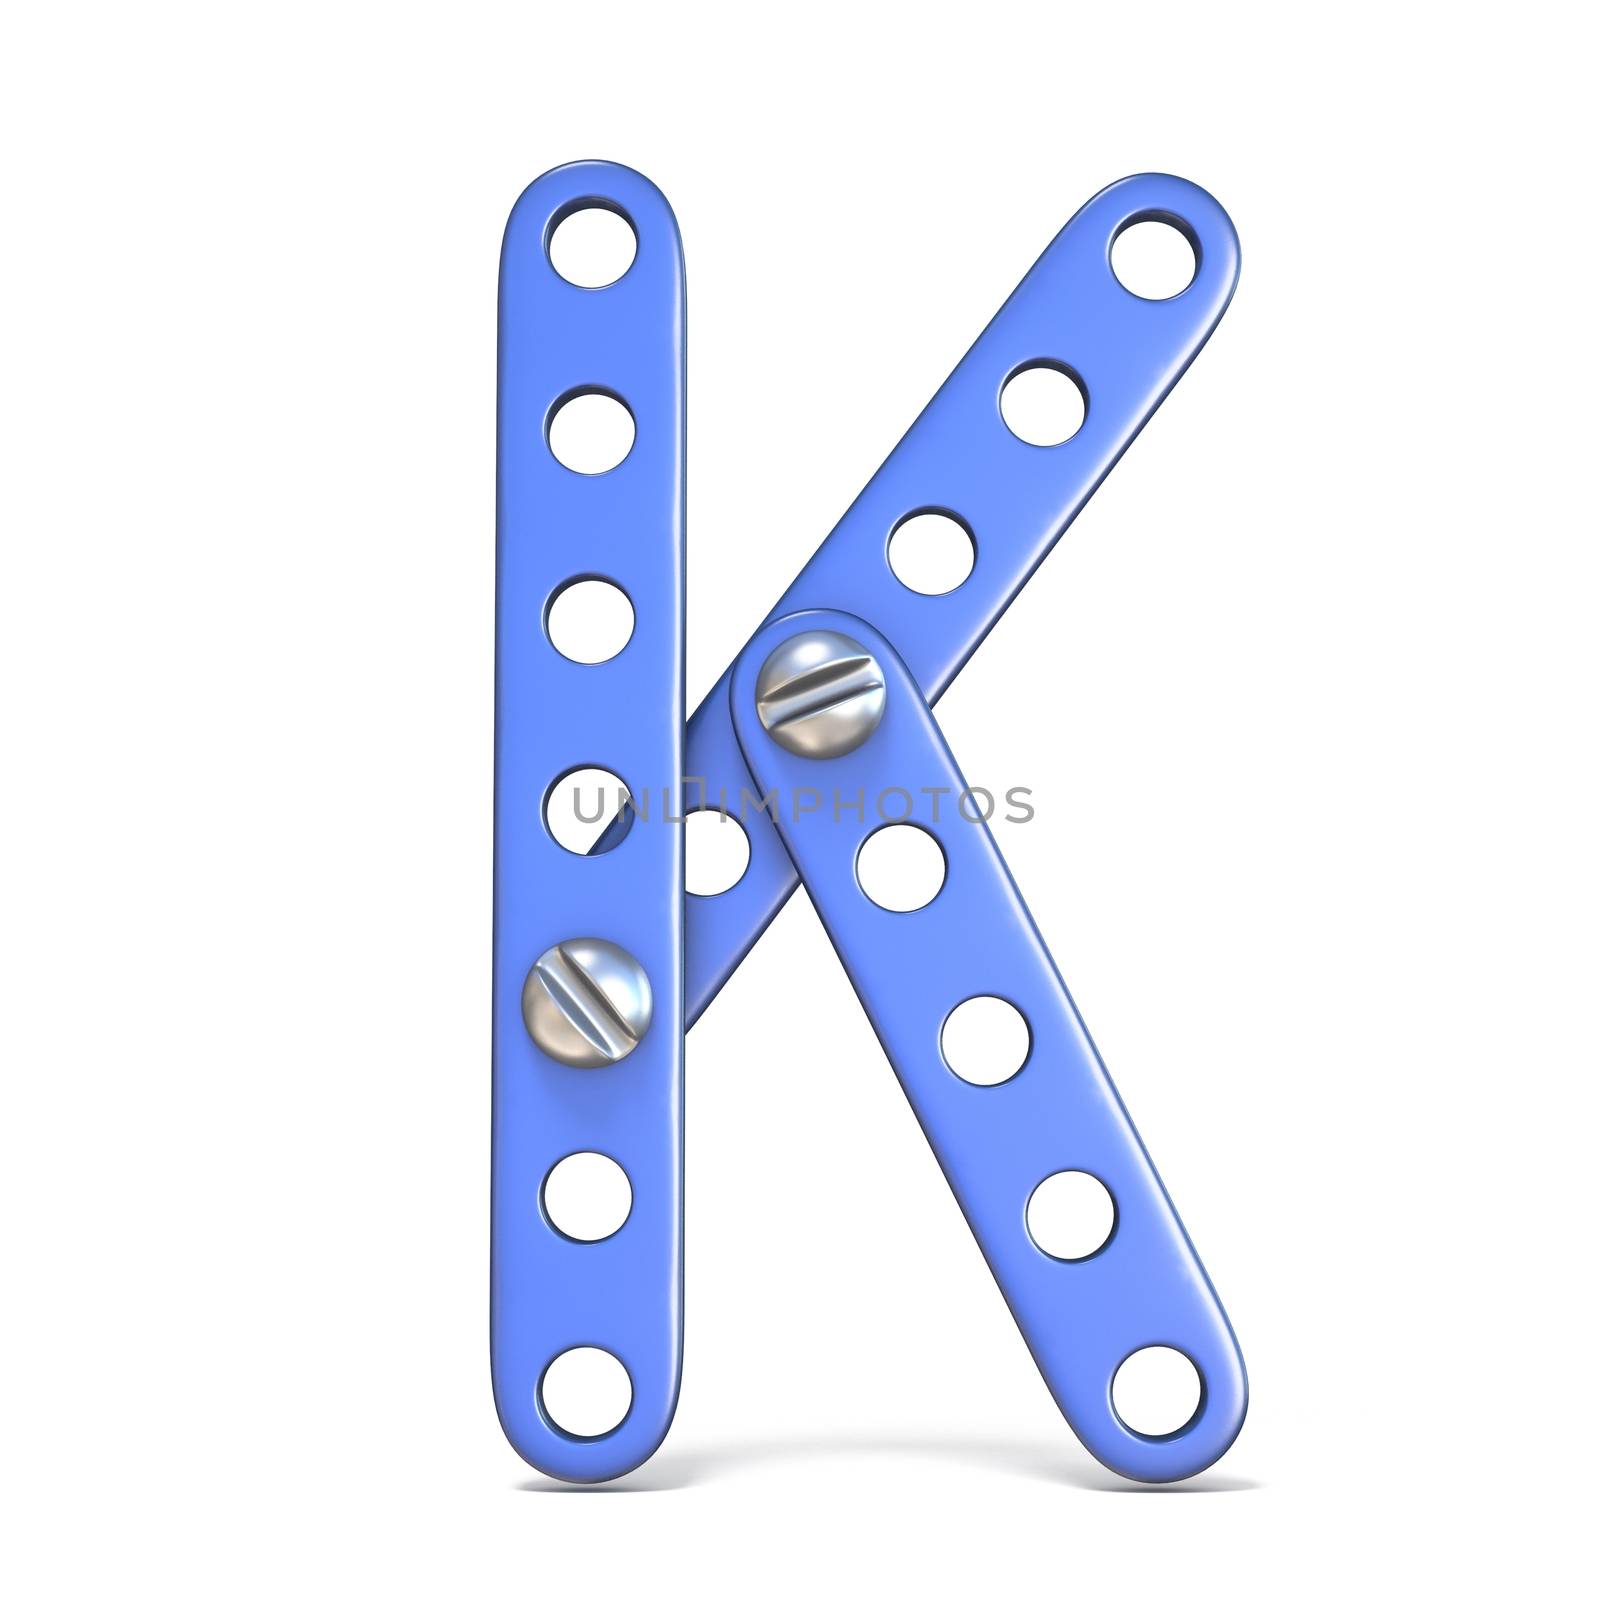 Alphabet made of blue metal constructor toy Letter K 3D by djmilic